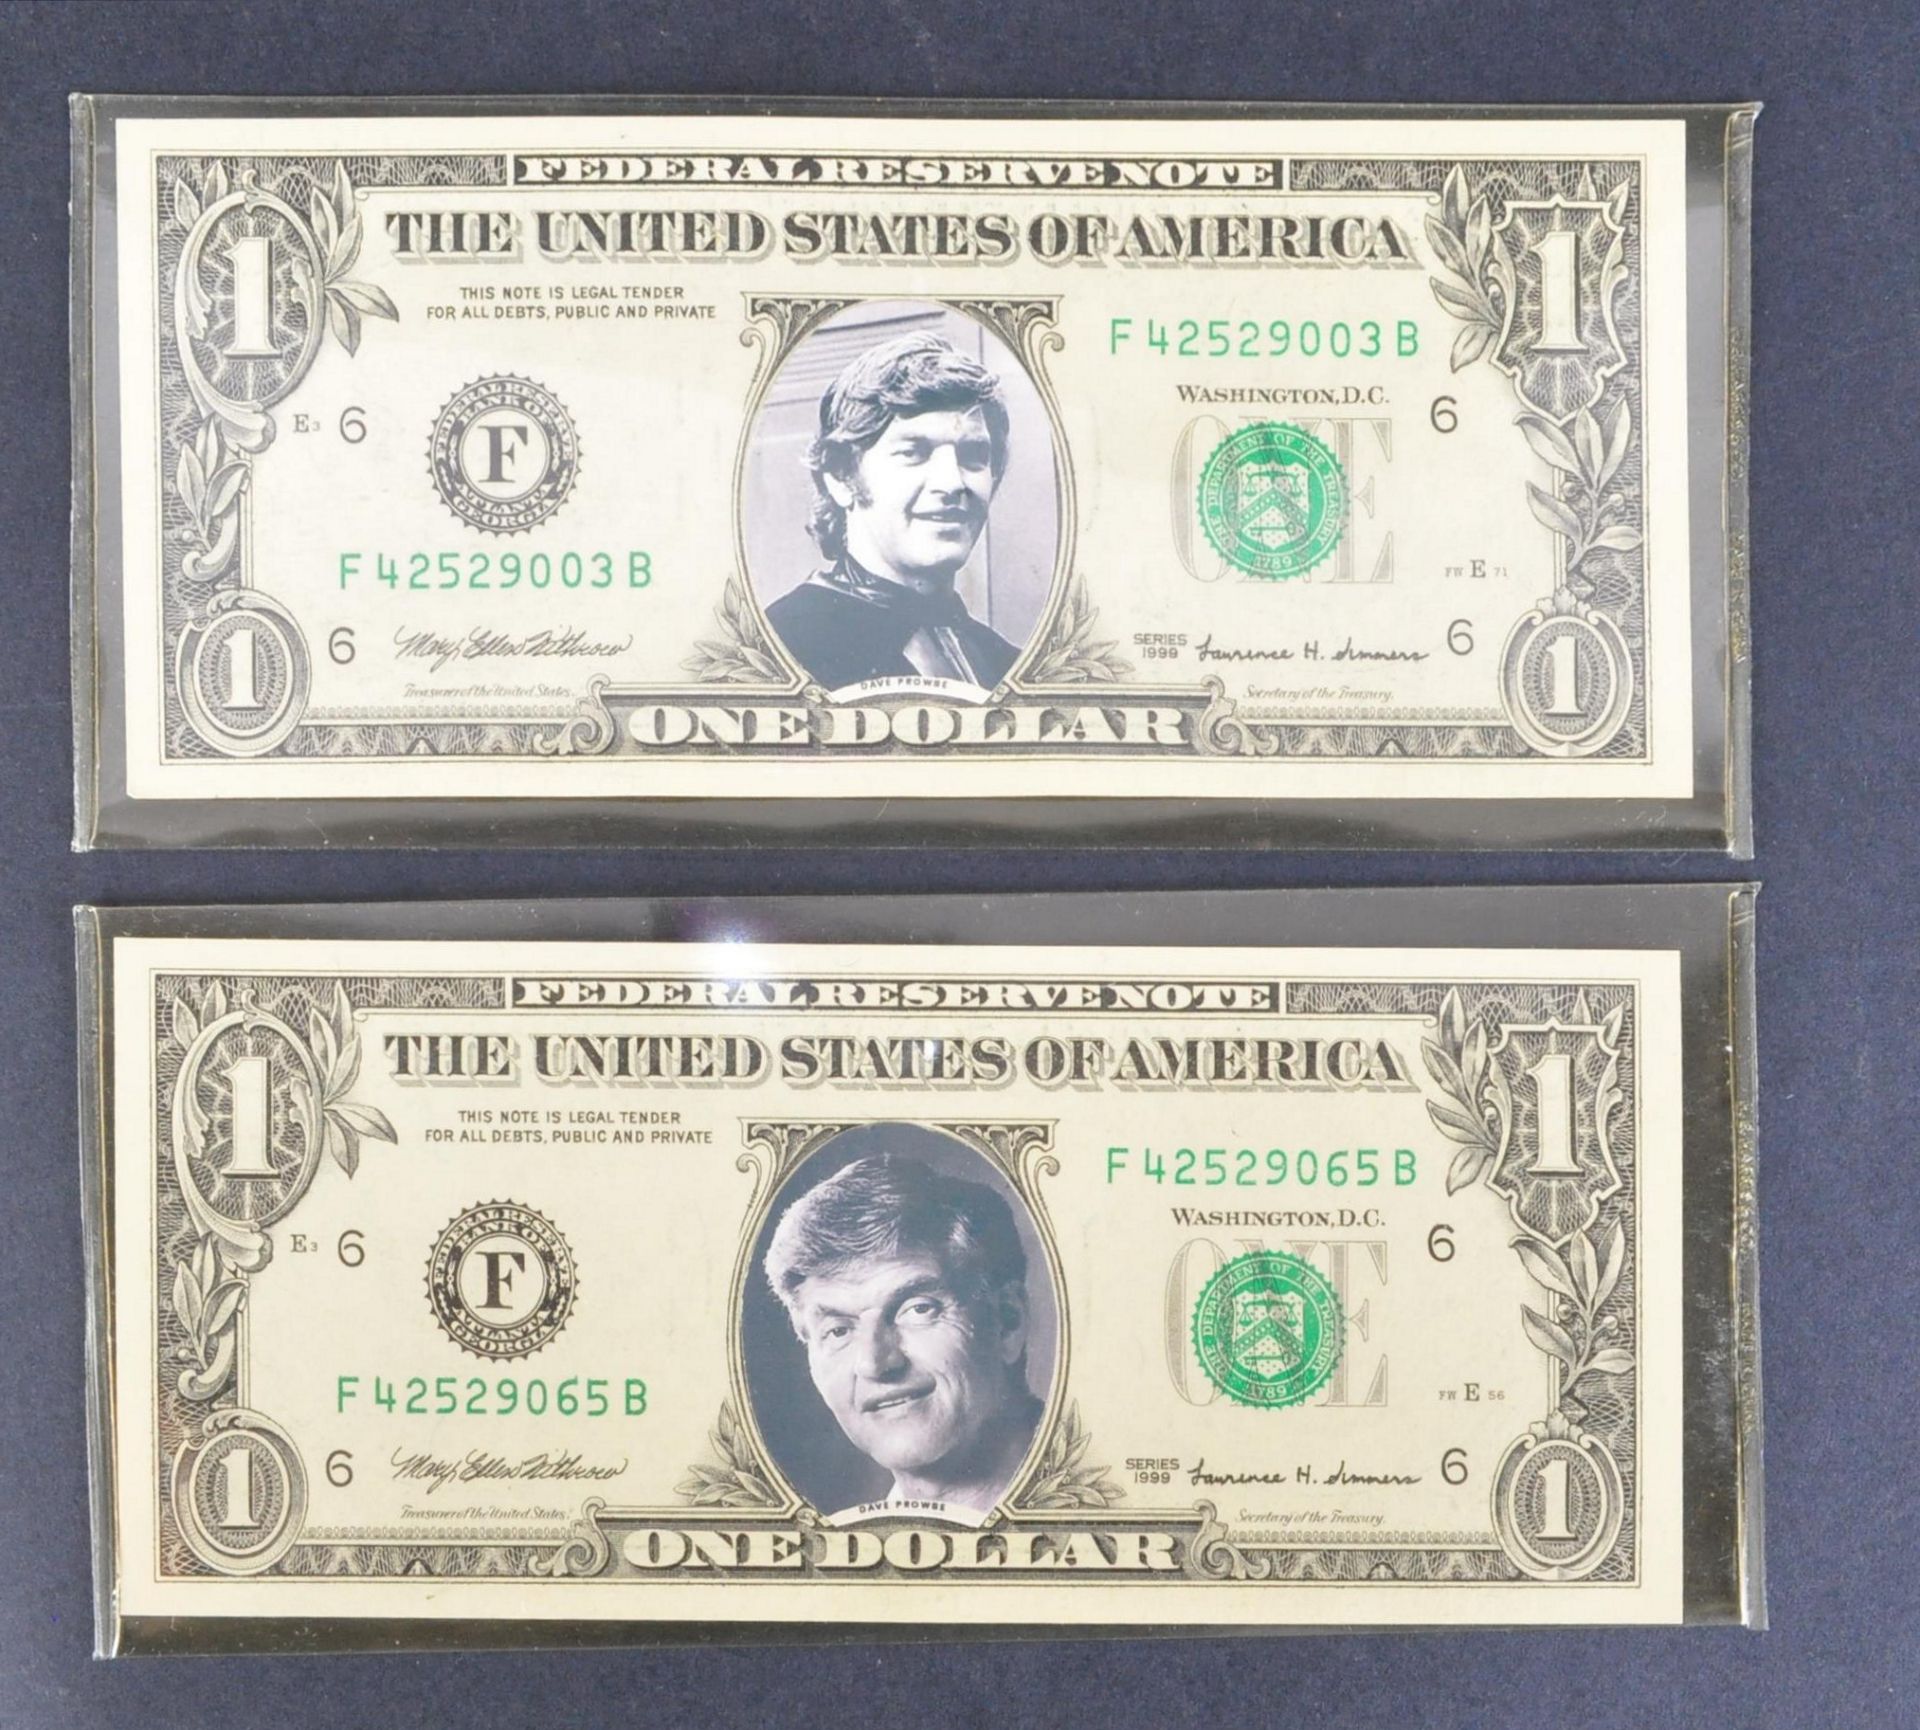 ESTATE OF DAVE PROWSE - CUSTOM PRINTED US AMERICAN ONE DOLLAR BILLS